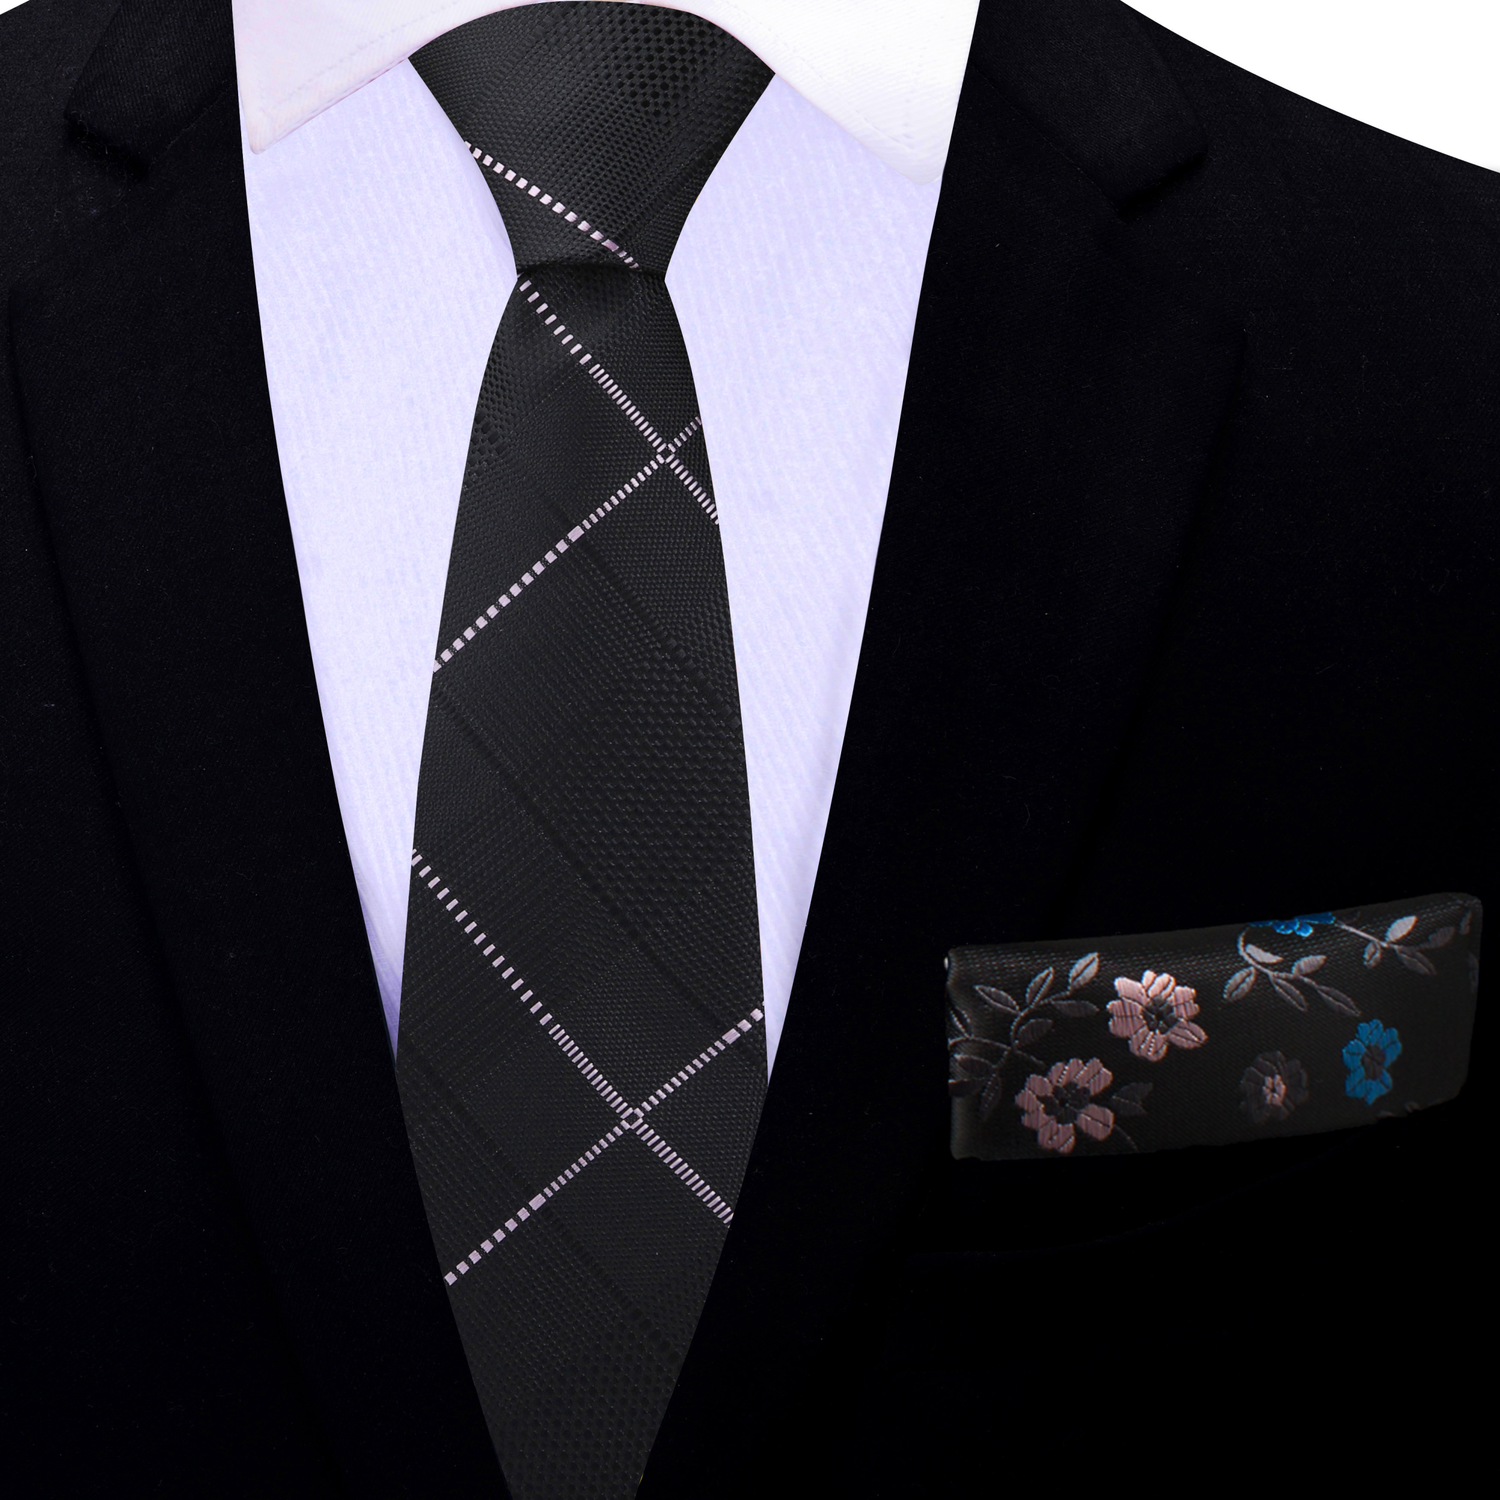 Thin Tie: Black, Pink Plaid Tie and Black, Pink, Blue Floral Square